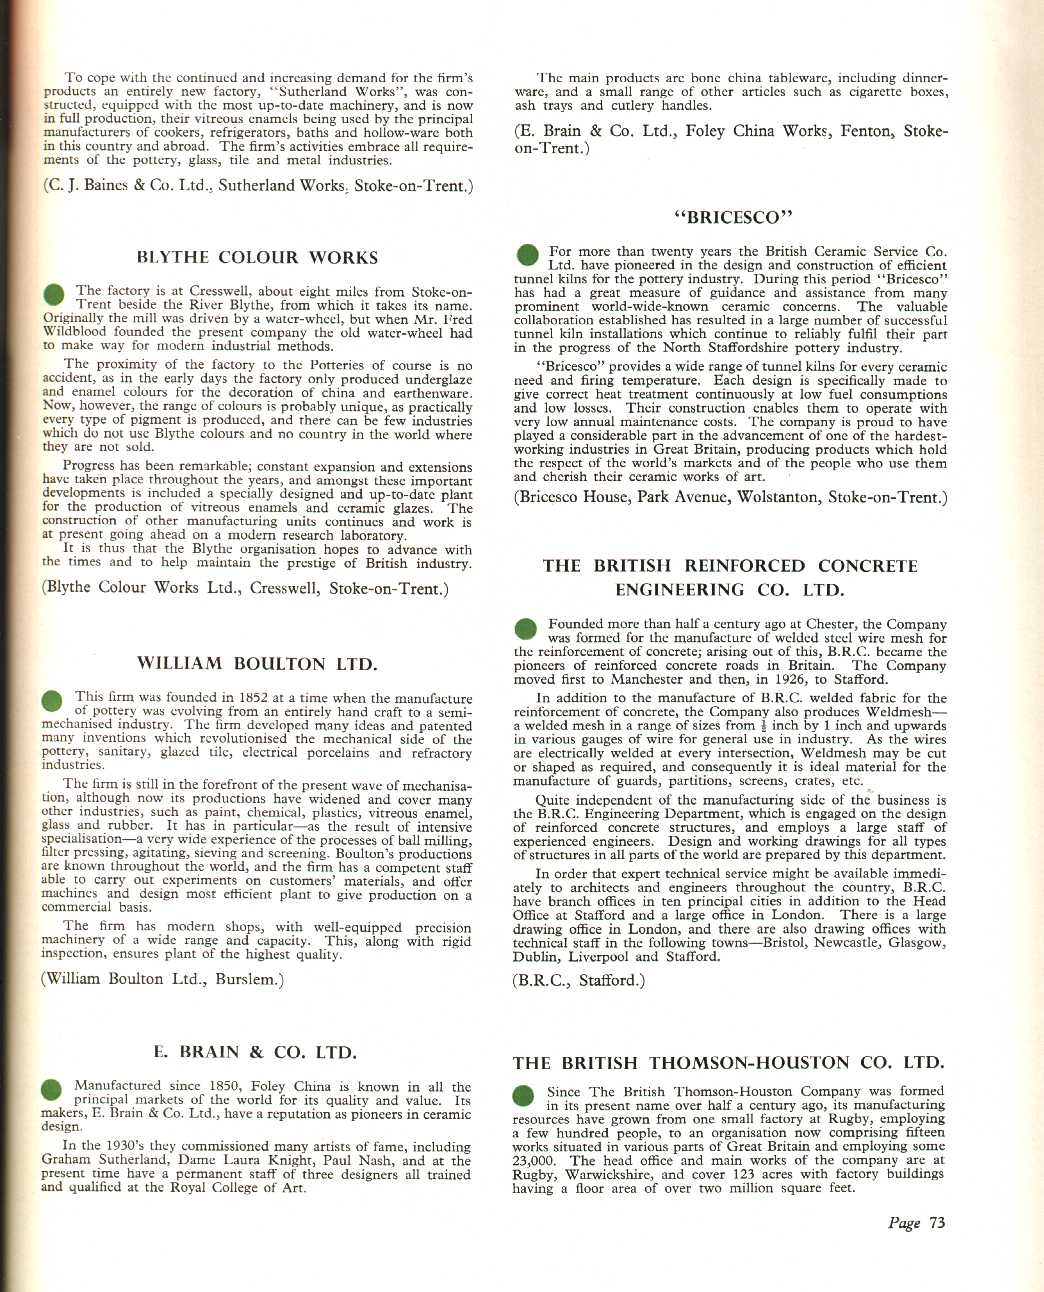 A guide to some of the leading firms of North Staffordshire, Blythe Colour Works, William Boulton Ltd, E. Brain & Co. Ltd, "BRICESCO", The British Reinforced Concrete Engineering Co. Ltd, The British Thomson-Houston Co. Ltd.